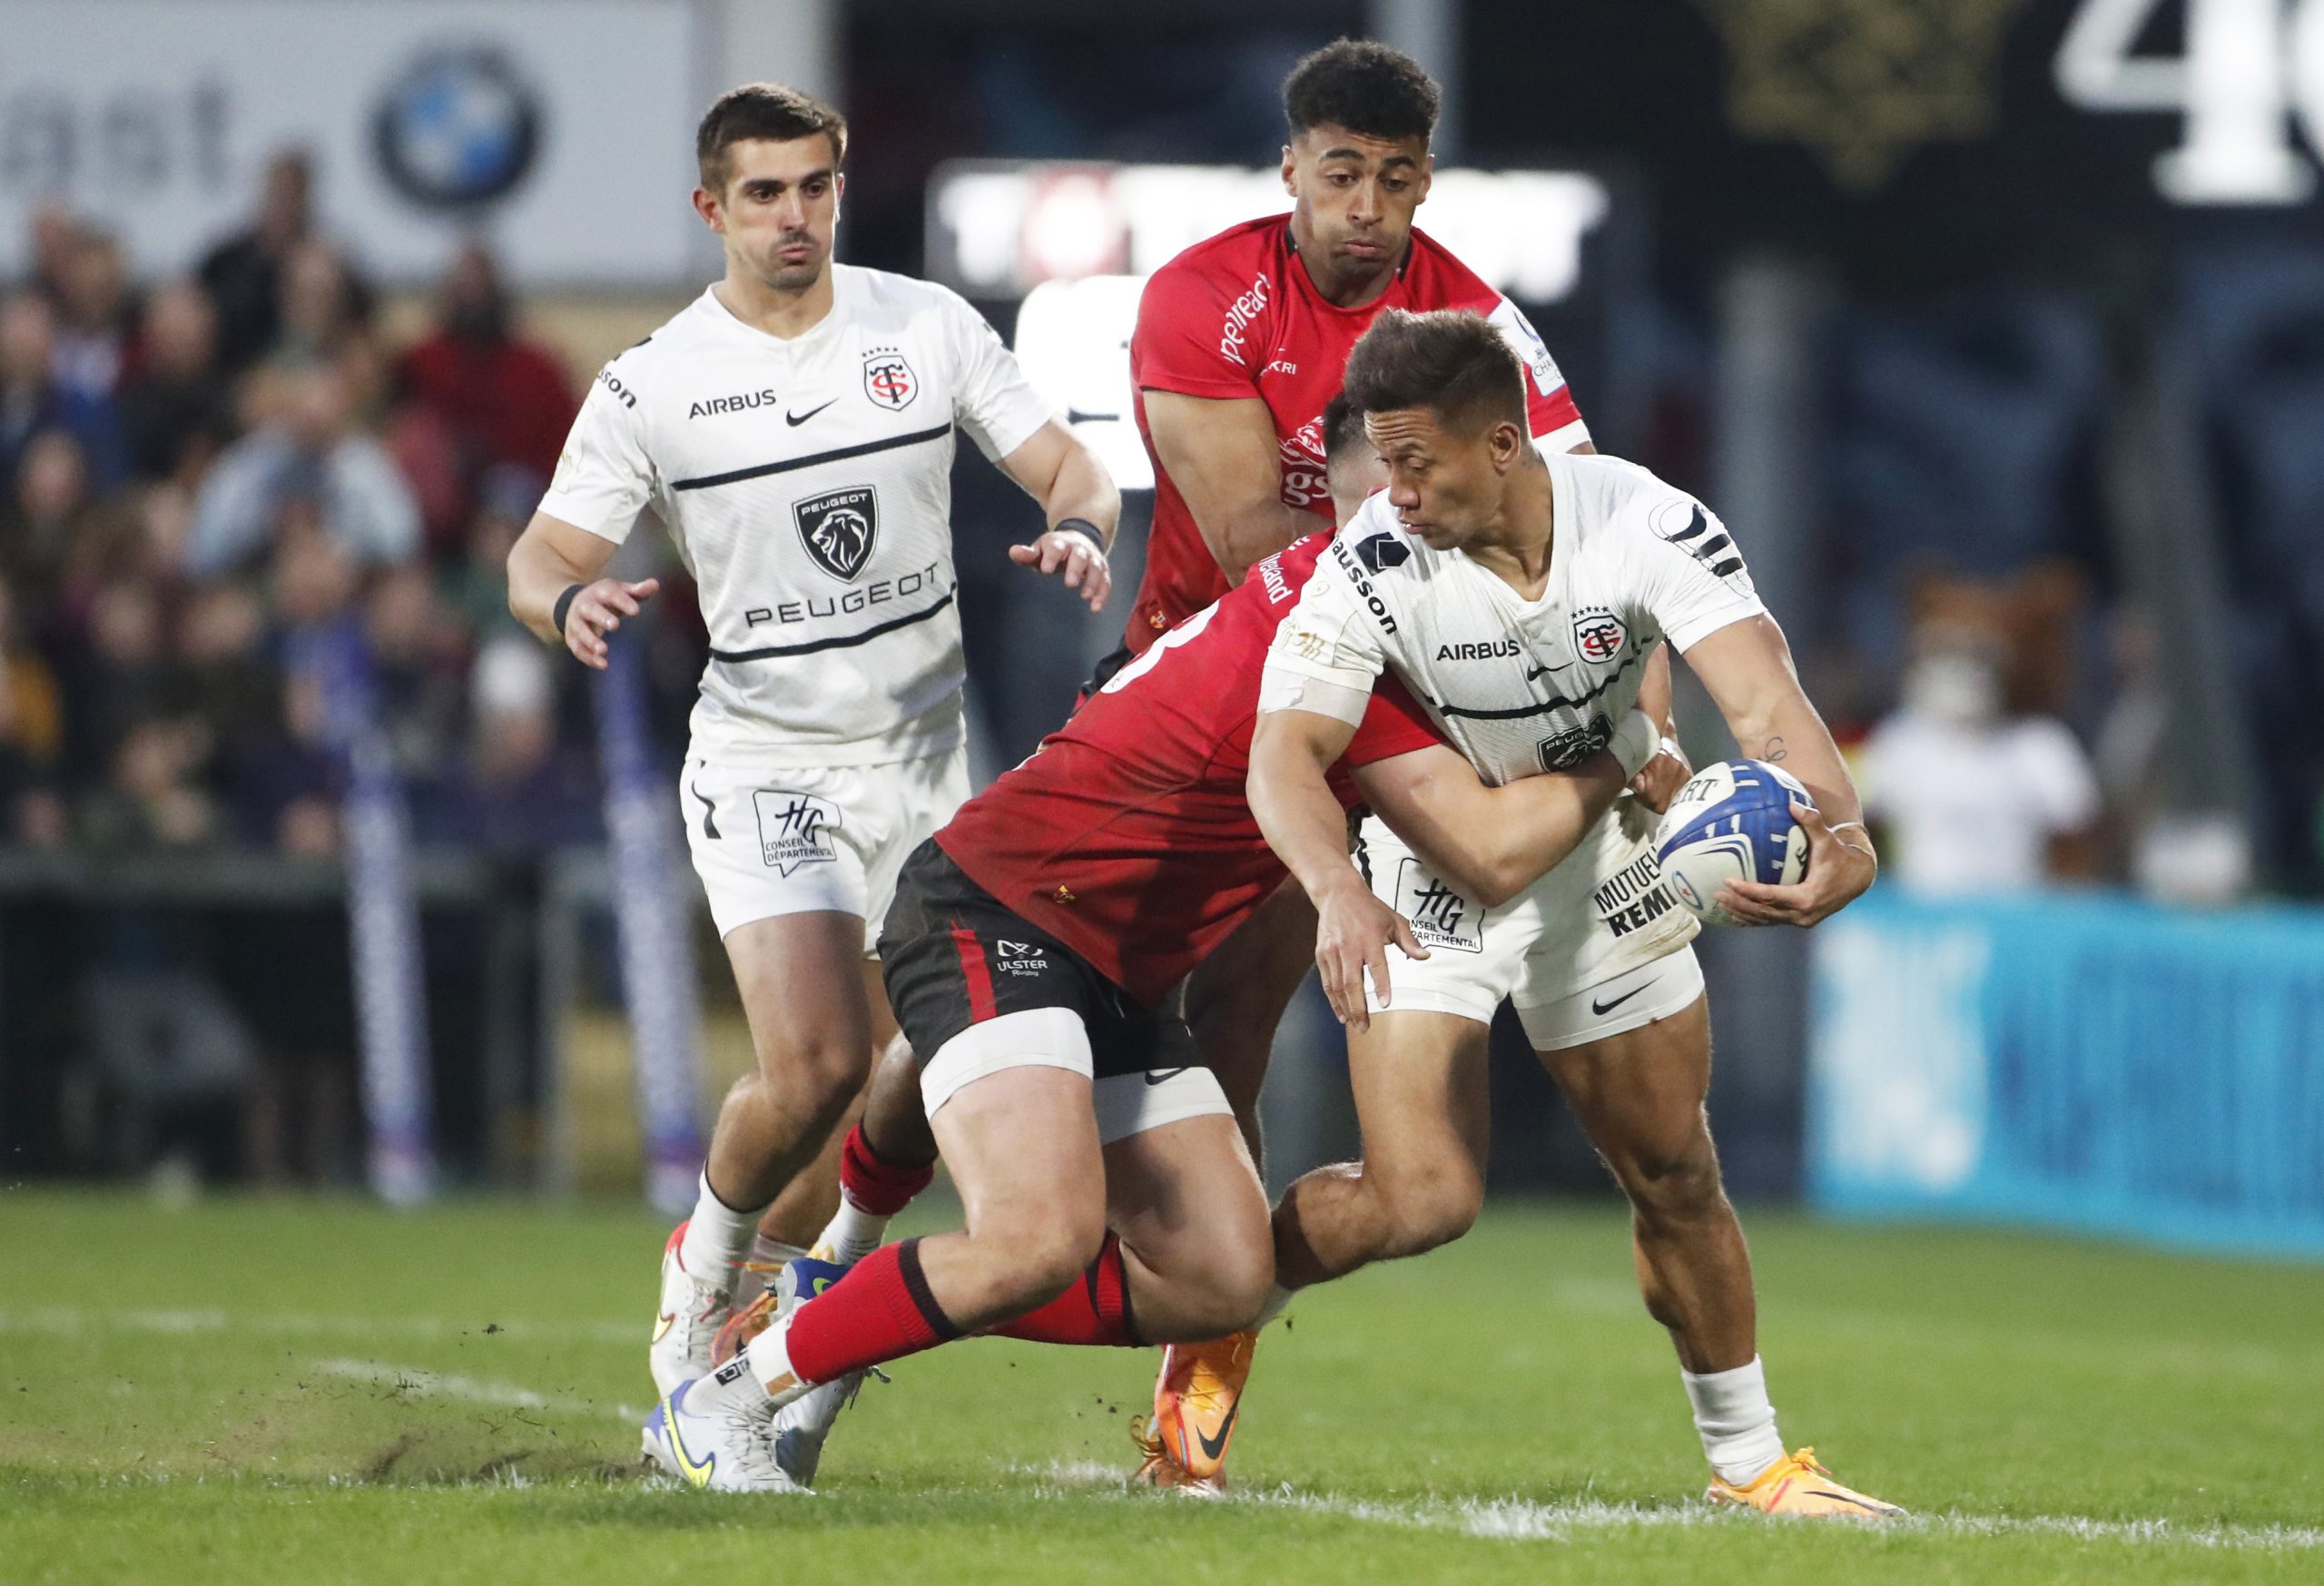 Ulster v Toulouse - Heineken Champions Cup - Round of 16 - Second Leg - Kingspan Stadium